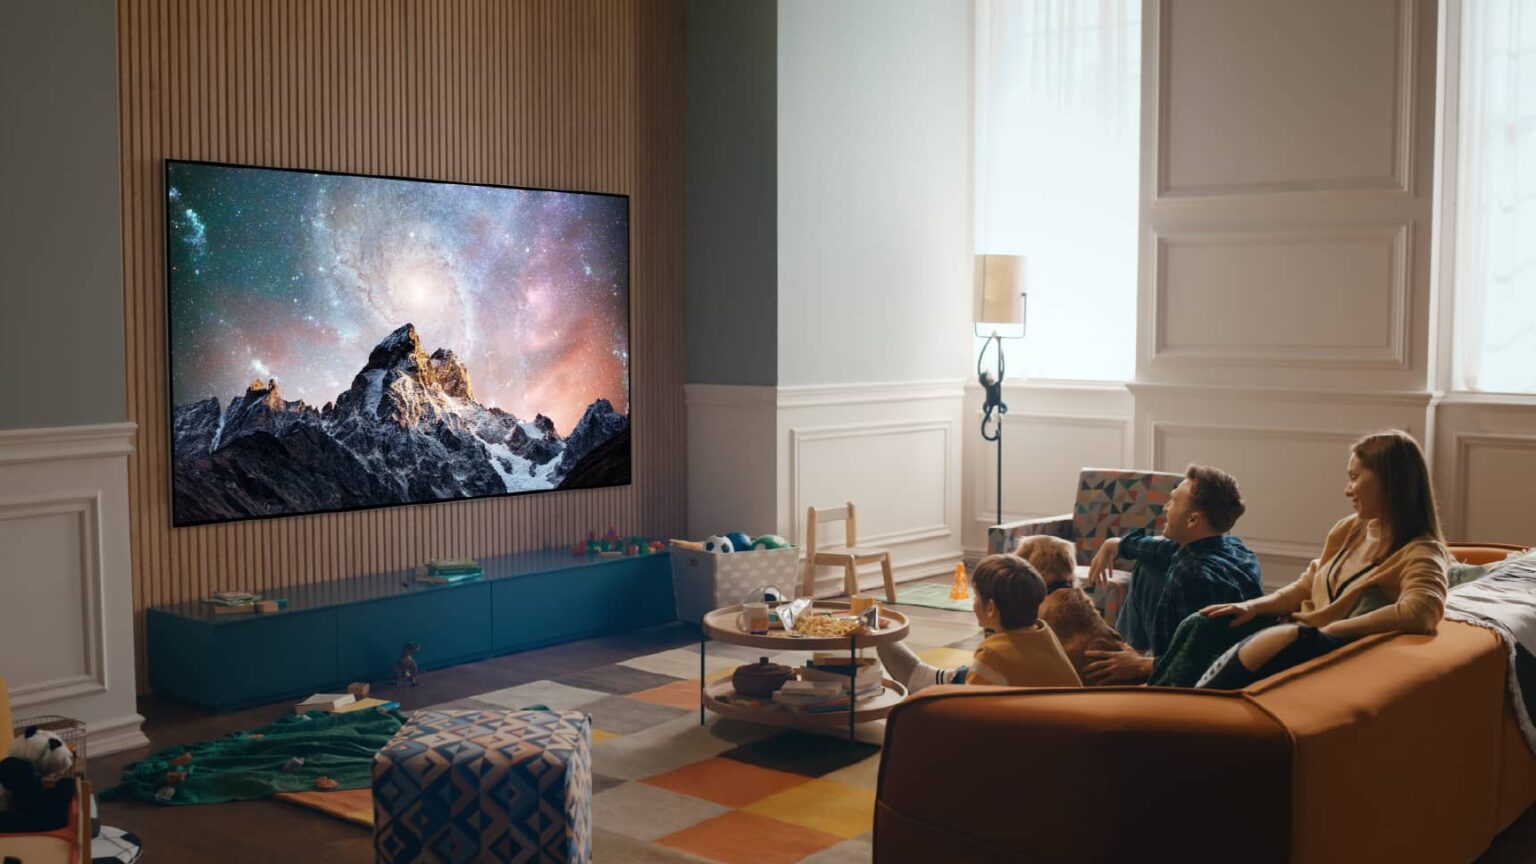 New LG OLED TV Redefine Viewing And User Experience With Unmatched Features, Technologies